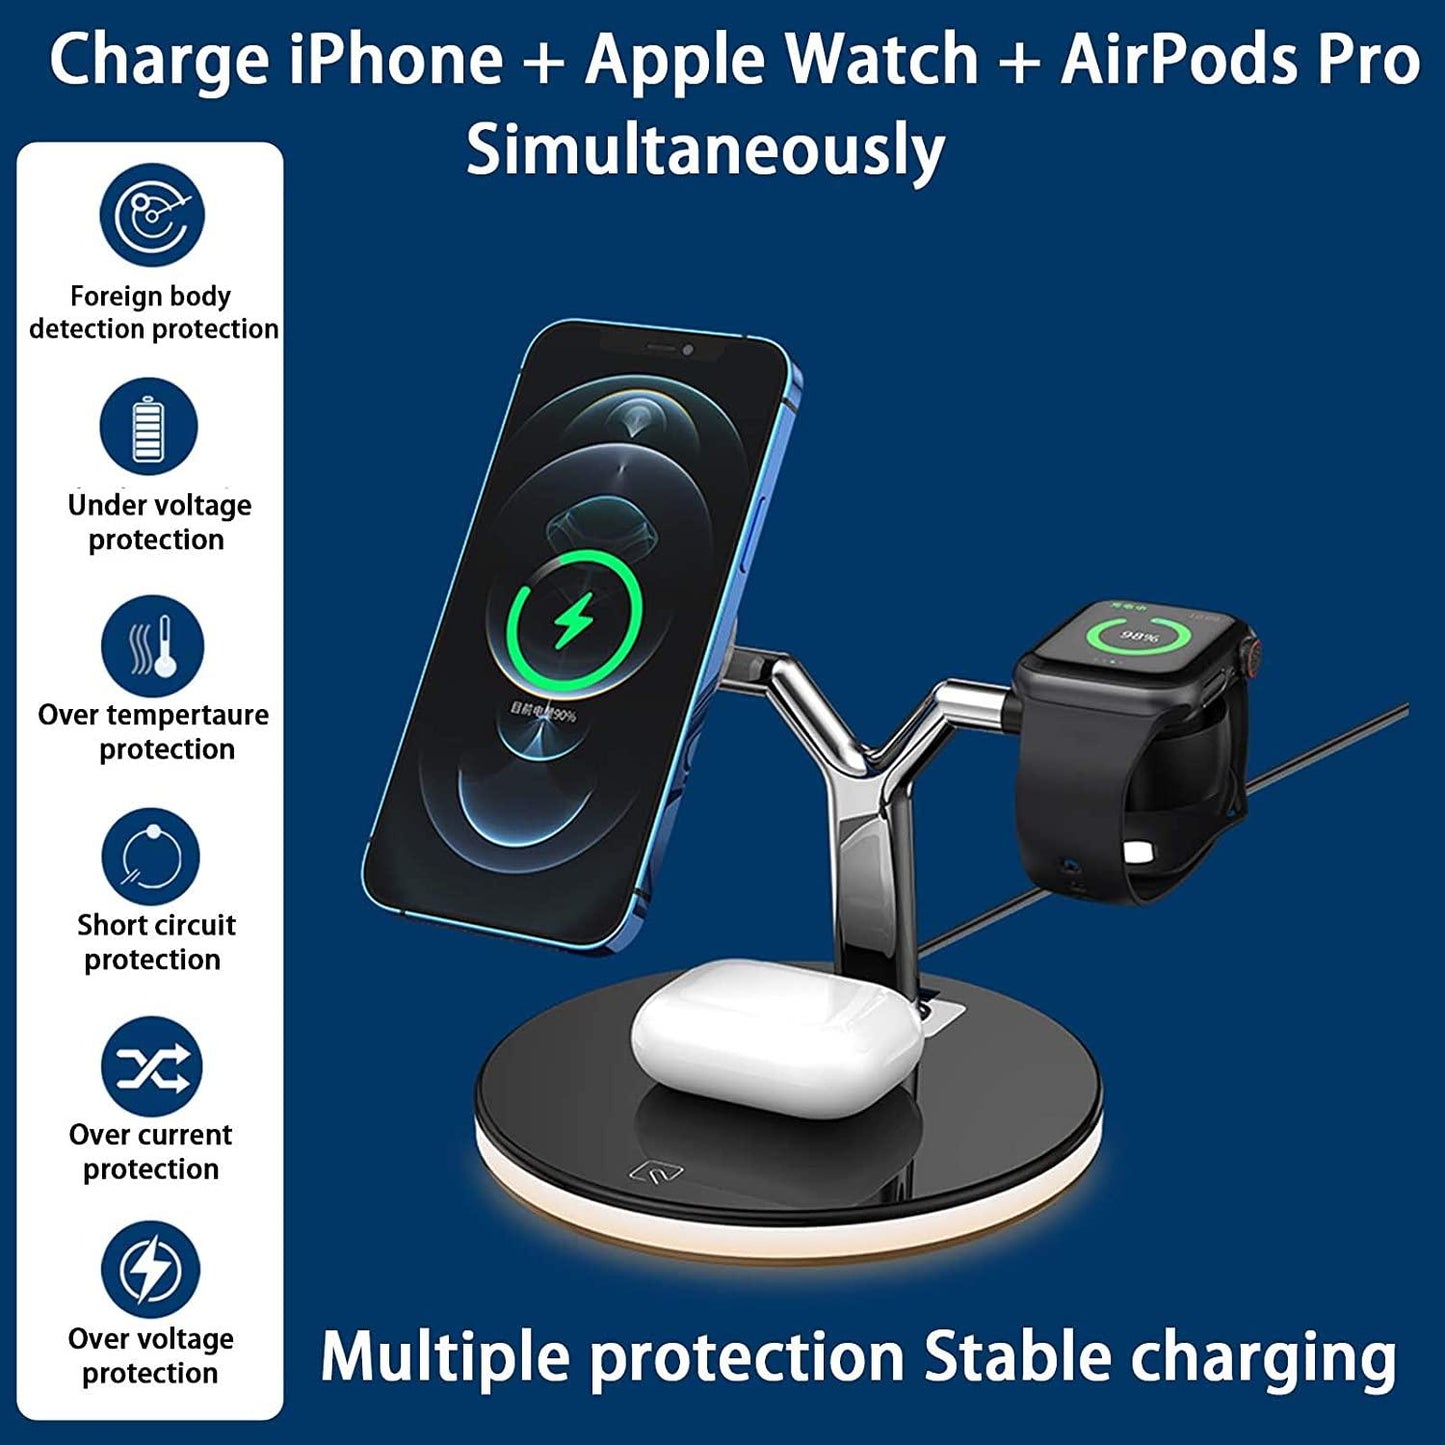 25W 3 in 1 Magnet Qi Fast Wireless Charger For Iphone 12 Mini Pro MAX Charging Station For Apple Watch 6 5 4 3 2 1 AirPods Pro